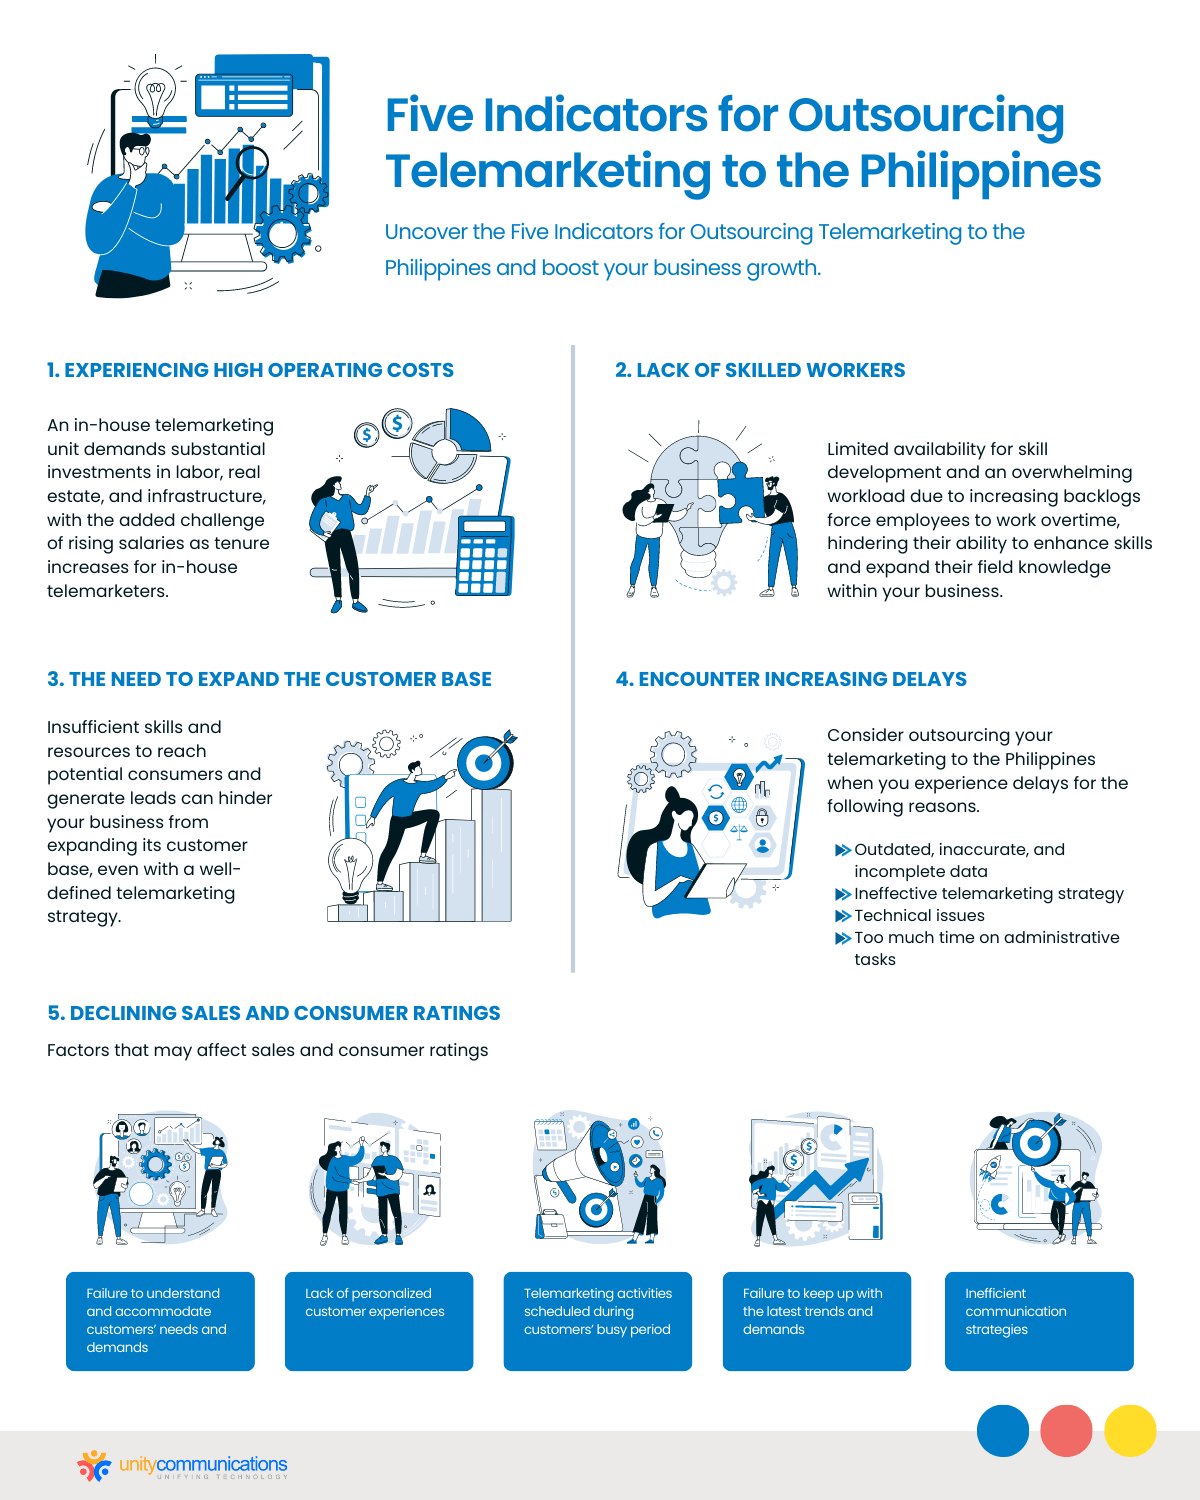 Five Indicators for Outsourcing Telemarketing to the Philippines